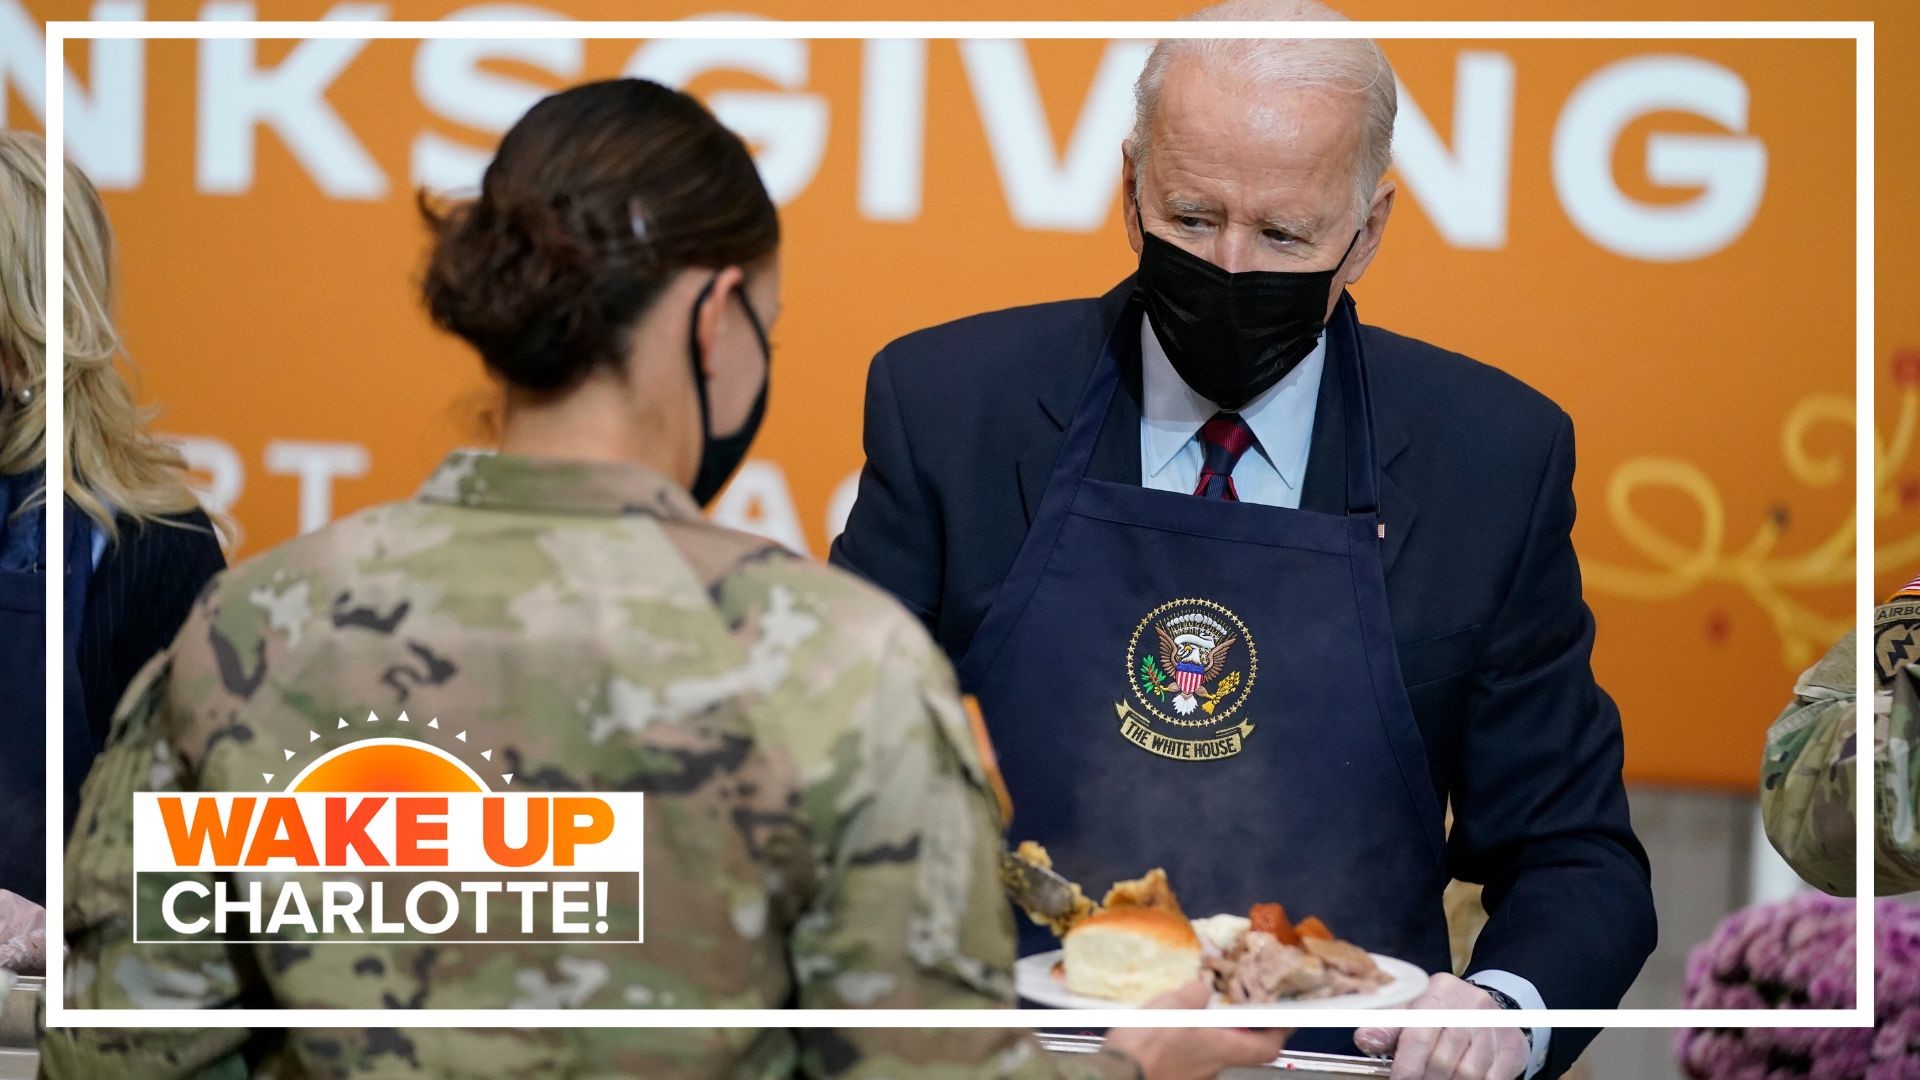 President Joe Biden and first lady Jill Biden will be in North Carolina to celebrate Thanksgiving with military families.